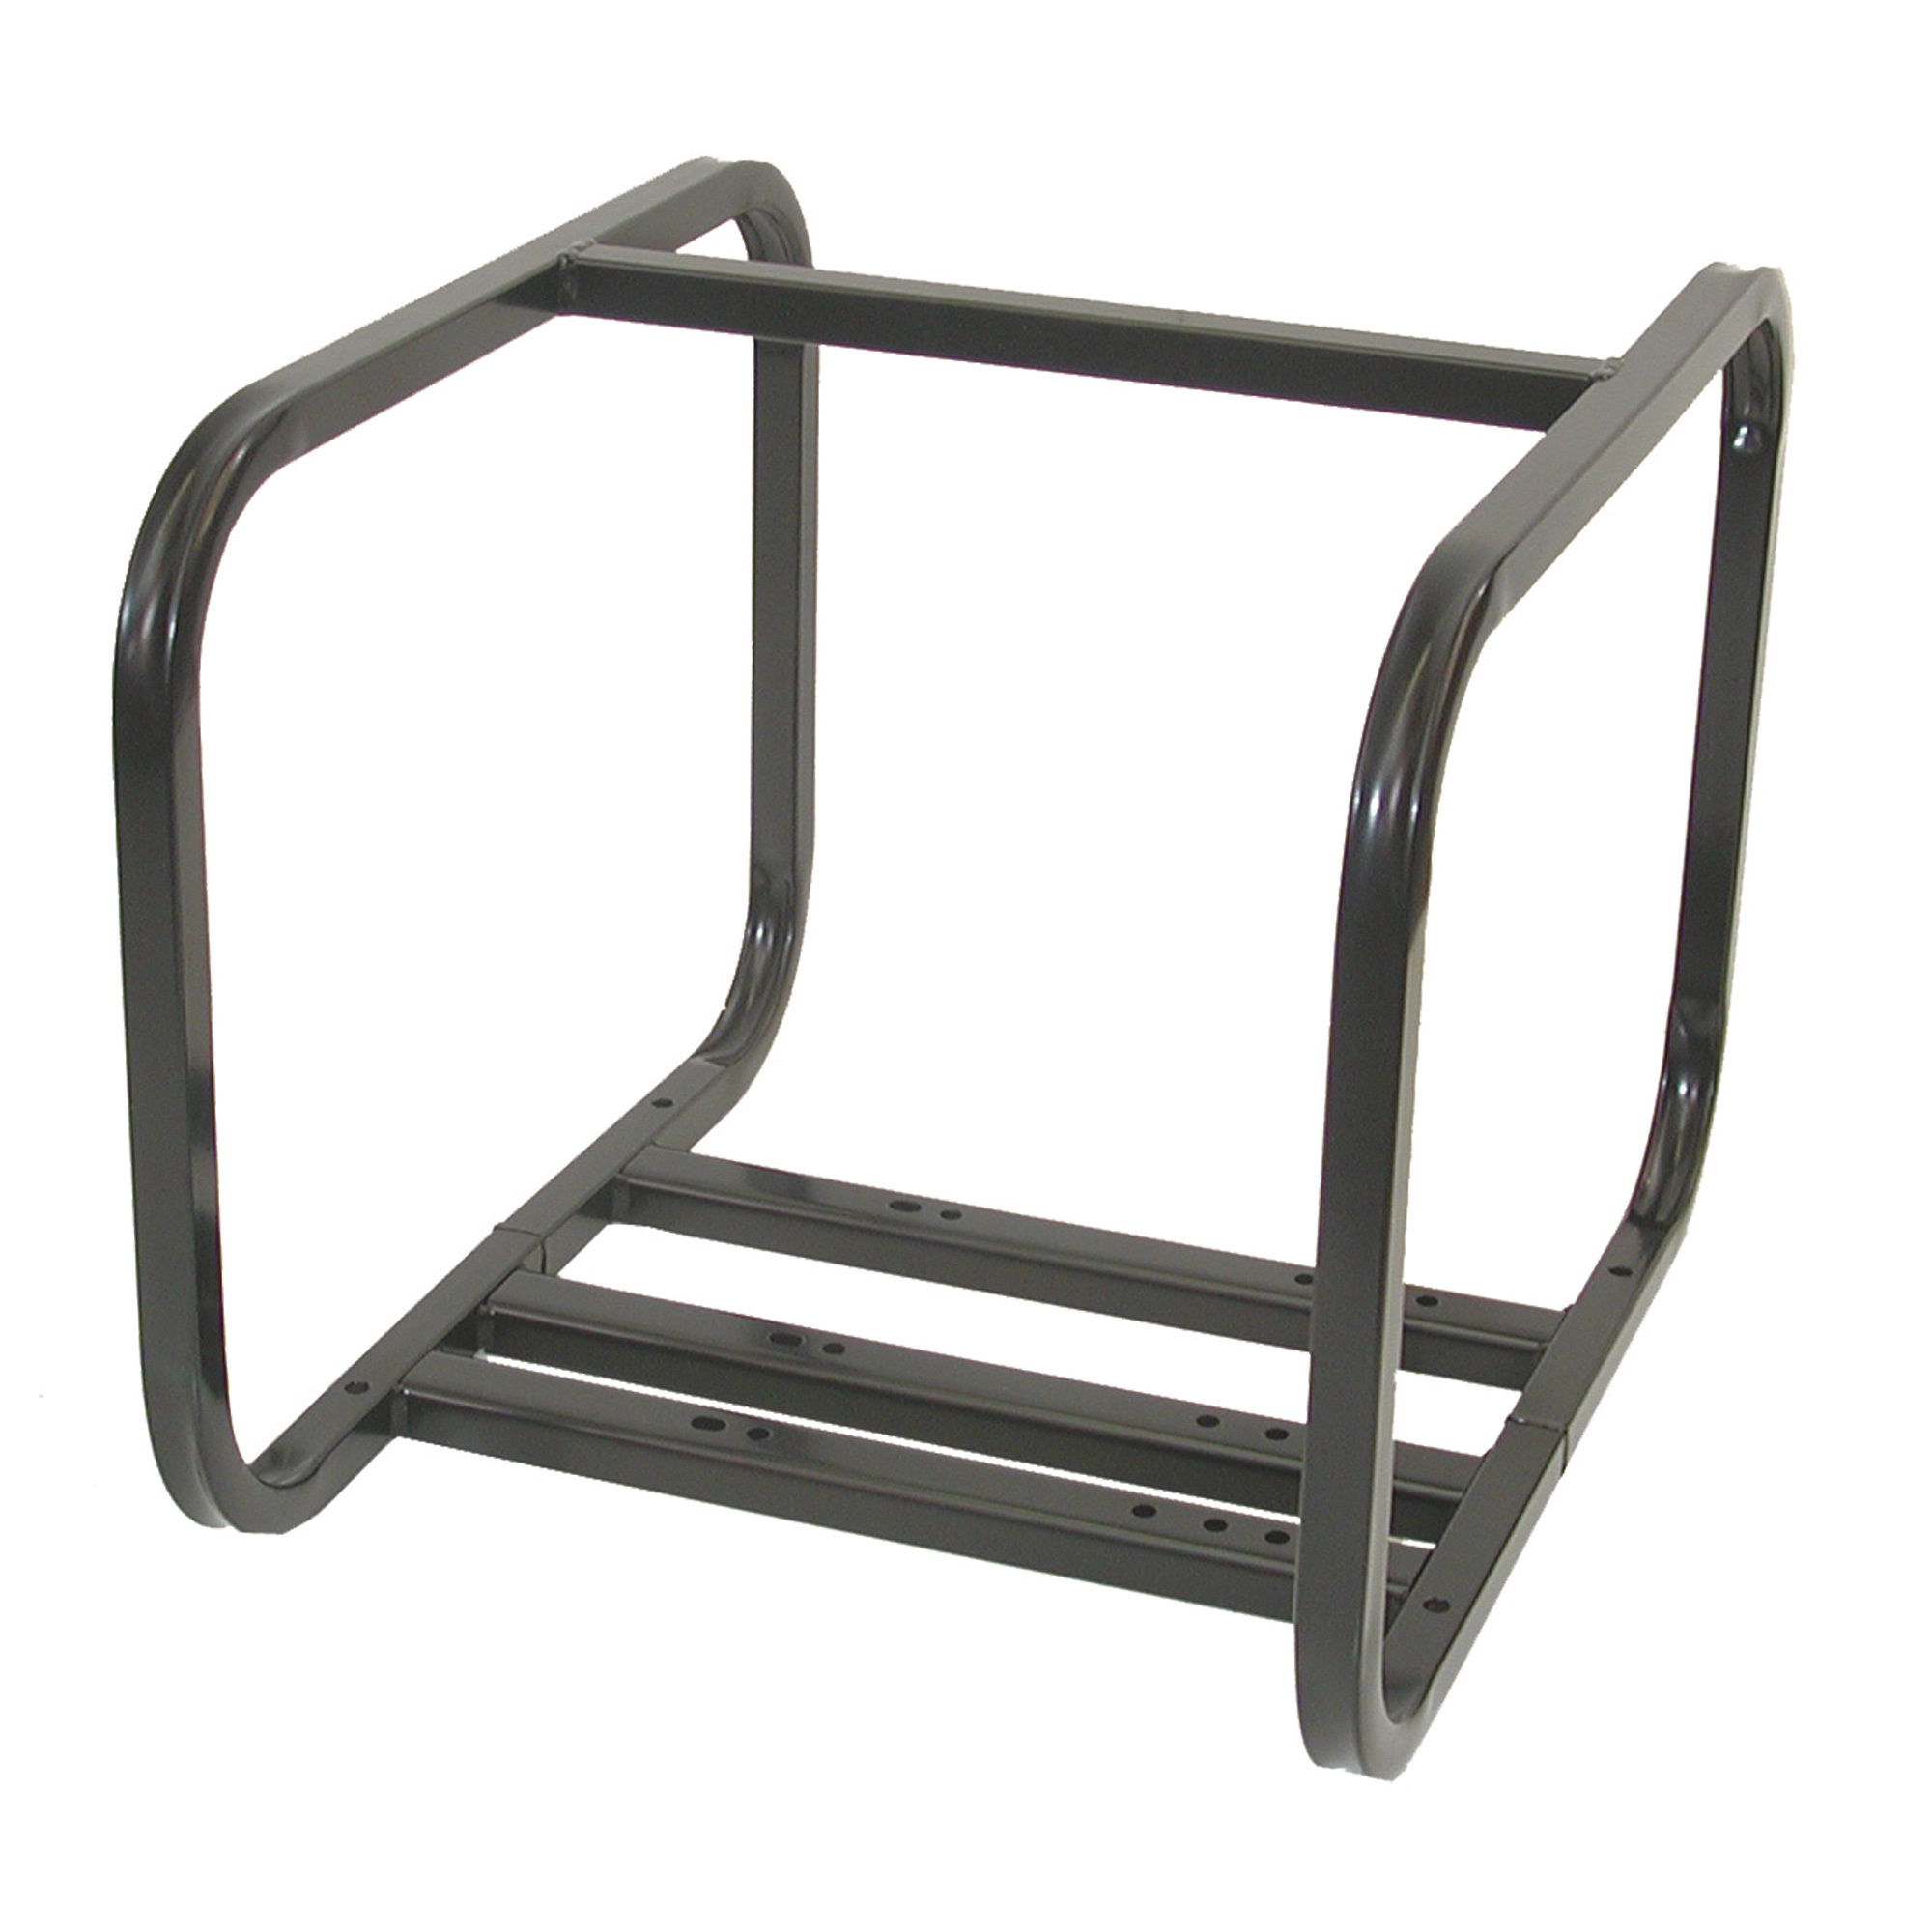 Water Pump Roll Cage â Fits IPT Pumps Item#s 10997, 10998 and 109970